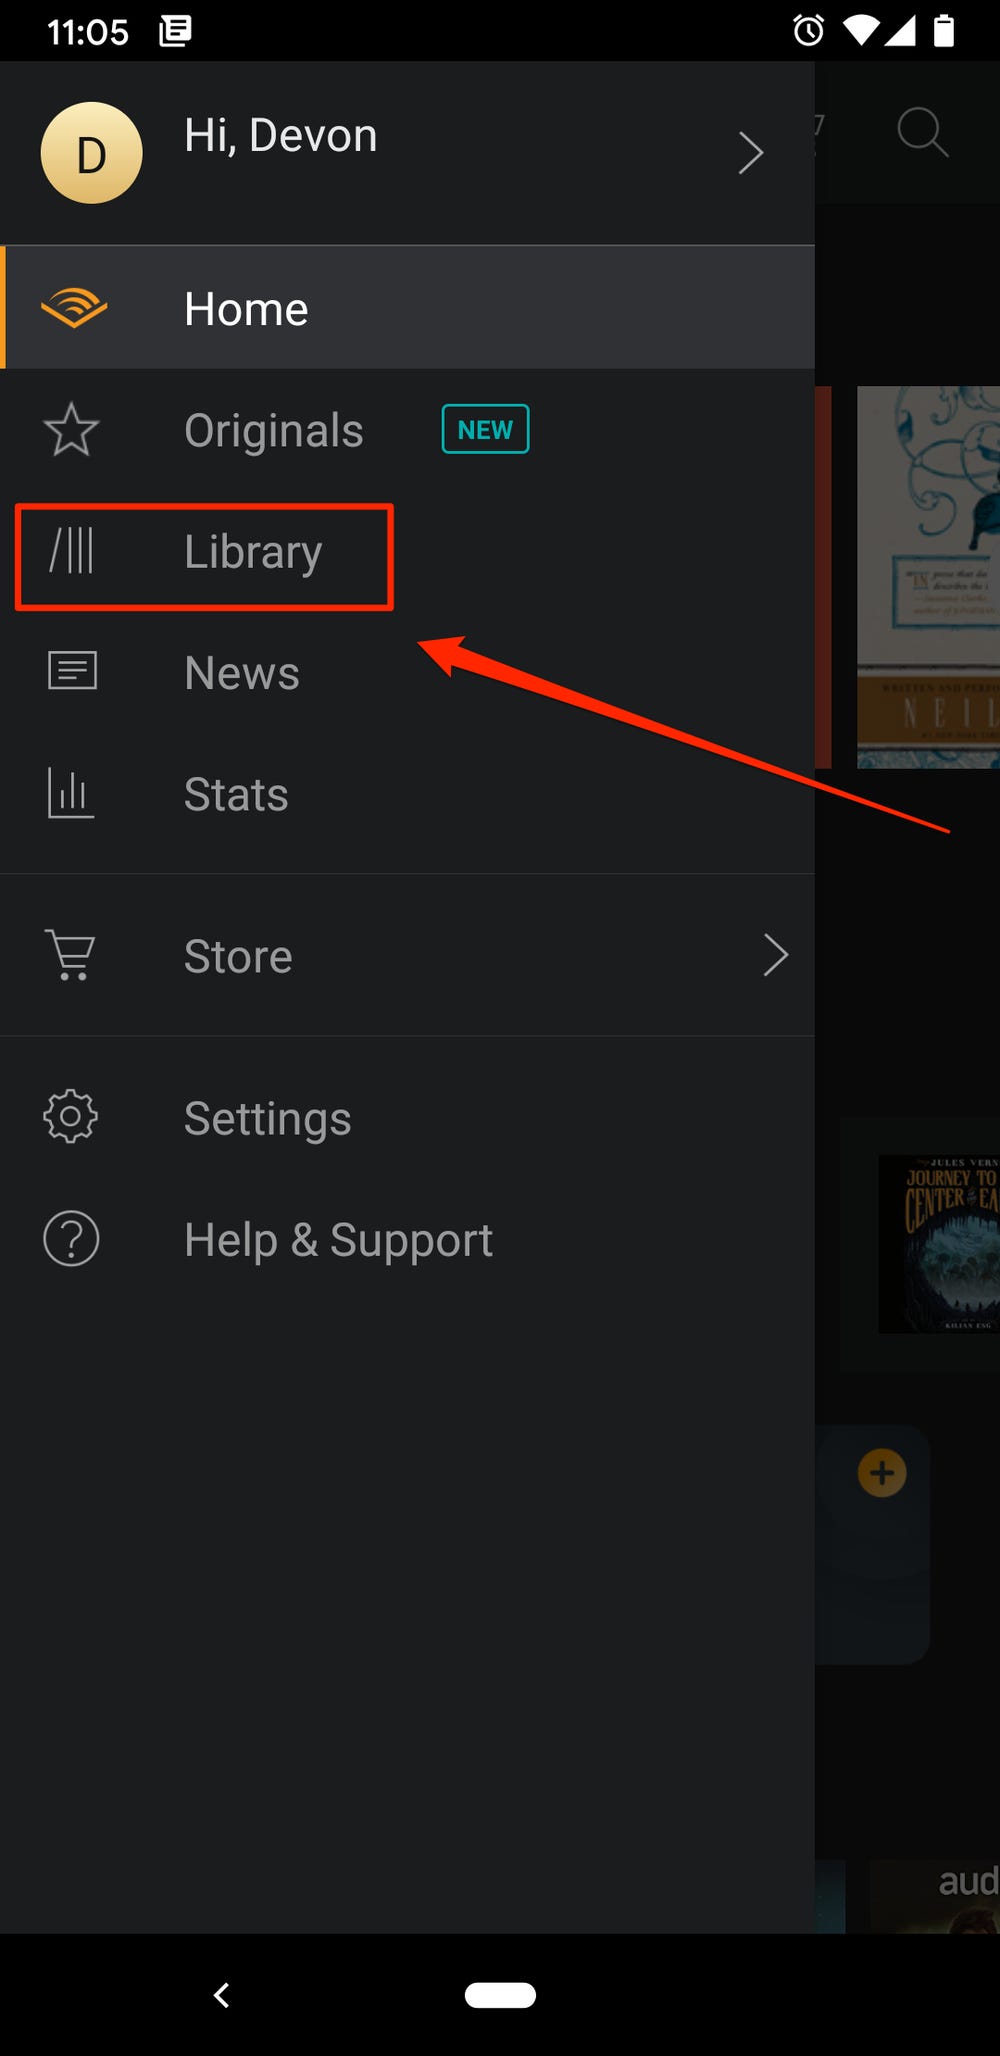 How to Download Audiobooks on Audible App